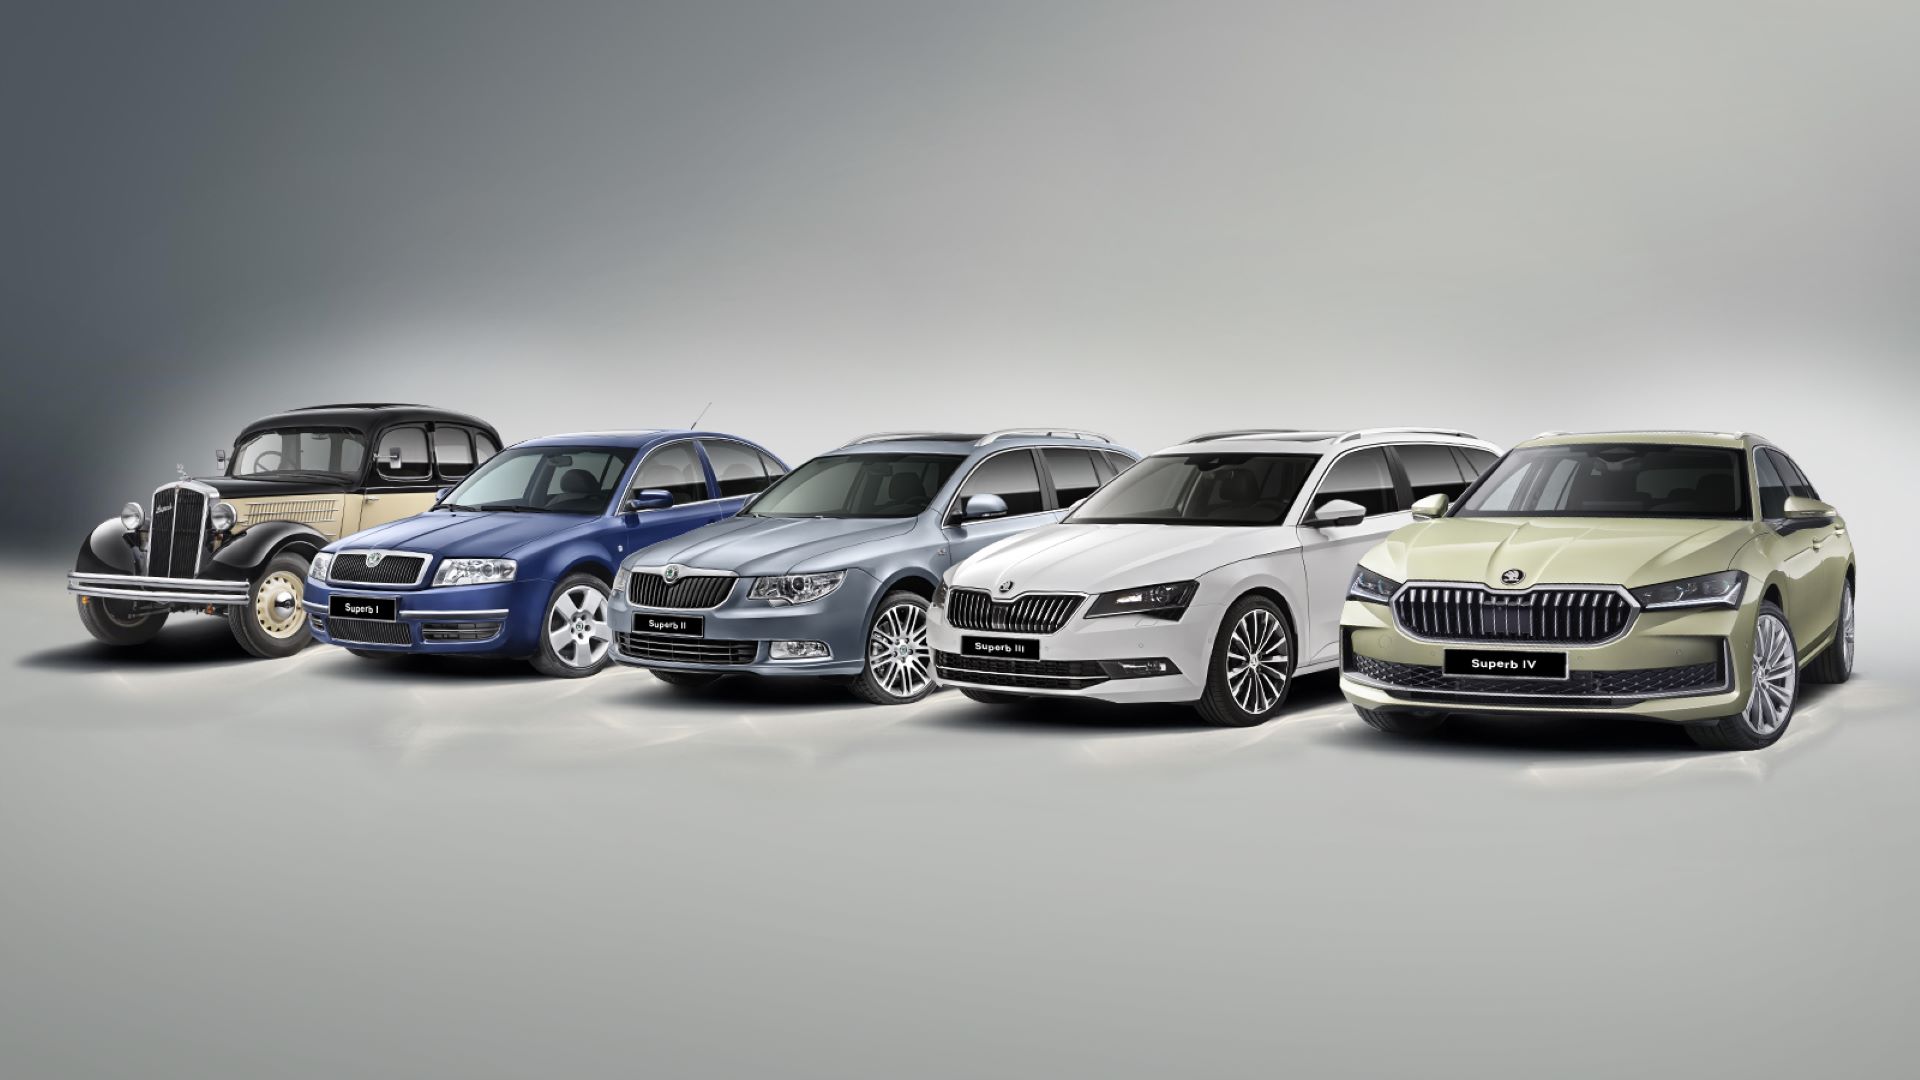 The all-new Škoda Superb Estate: More space, more comfort, more efficiency and more safety